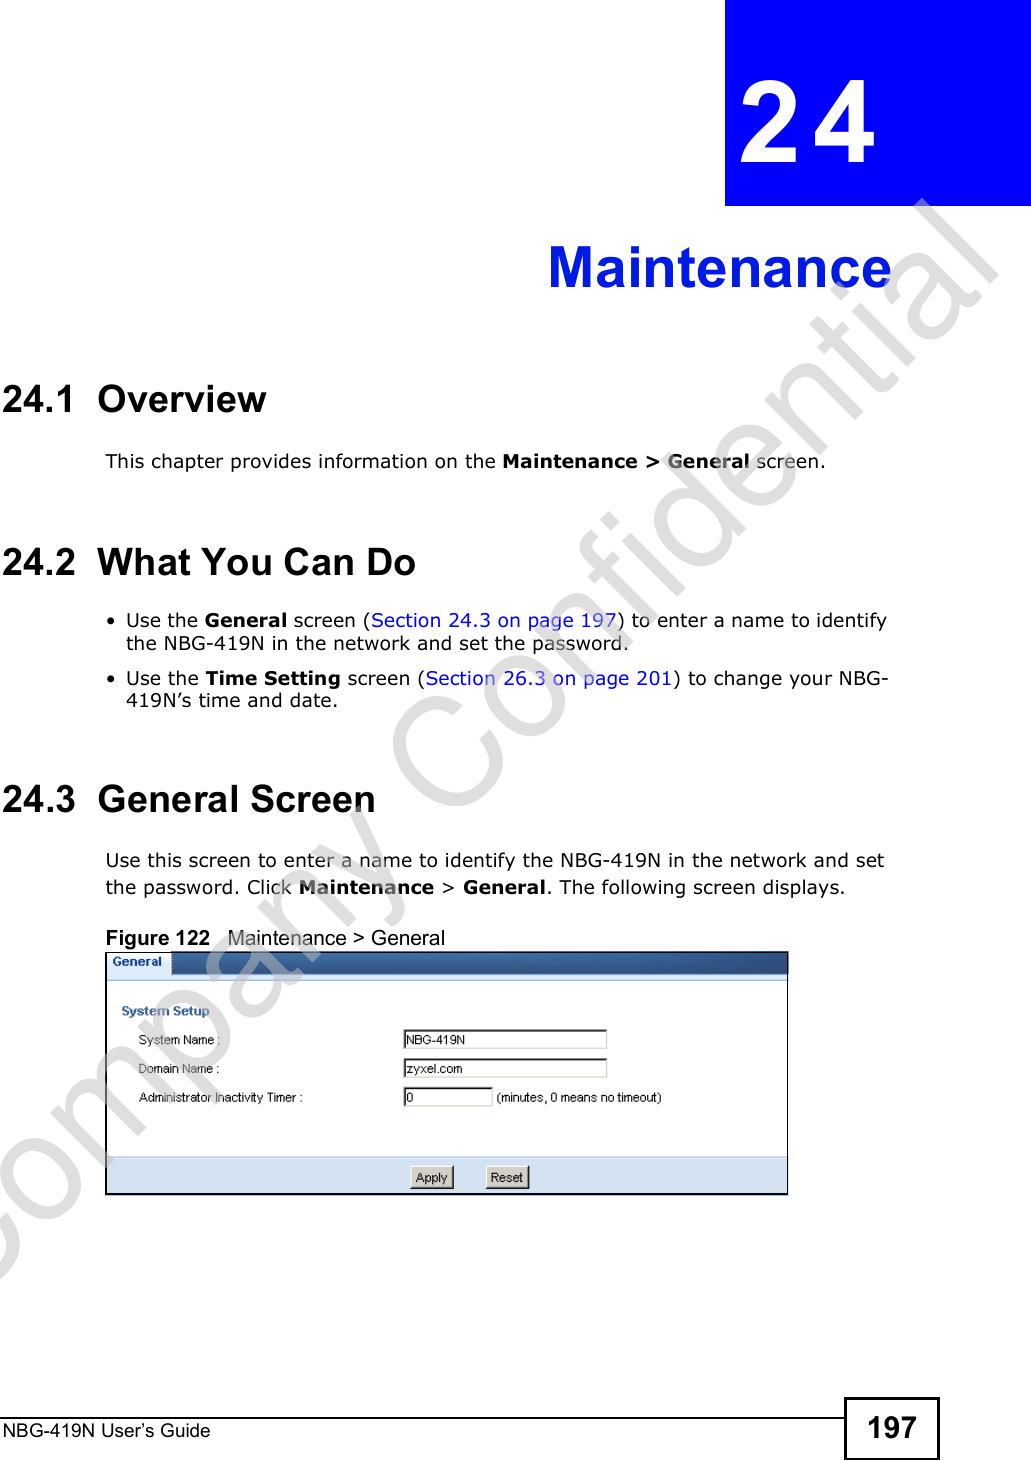 NBG-419N User s Guide 197CHAPTER  24 Maintenance24.1  OverviewThis chapter provides information on the Maintenance &gt; General screen. 24.2  What You Can Do Use the General screen (Section 24.3 on page 197) to enter a name to identify the NBG-419N in the network and set the password. Use the Time Setting screen (Section 26.3 on page 201) to change your NBG-419N!s time and date.24.3  General Screen Use this screen to enter a name to identify the NBG-419N in the network and set the password. Click Maintenance &gt; General. The following screen displays.Figure 122   Maintenance &gt; General Company Confidential